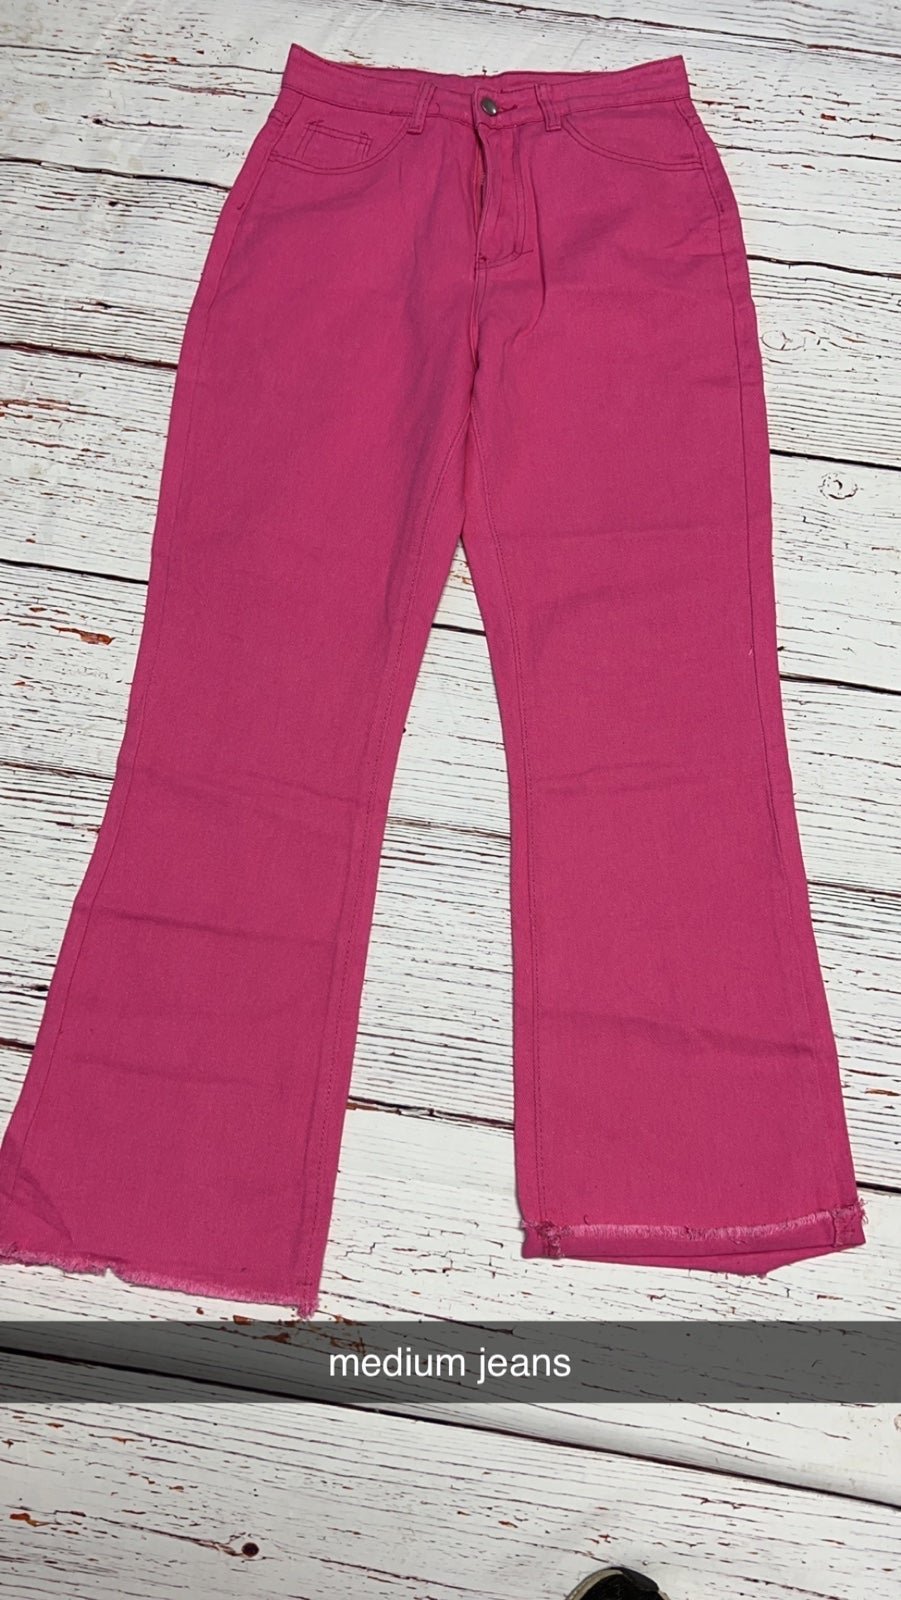 High quality New Pink Women´s High Waisted Flare Jeans Frayed Raw Hem Bell Bottom Denim Pants kG82f2x8Q Wholesale